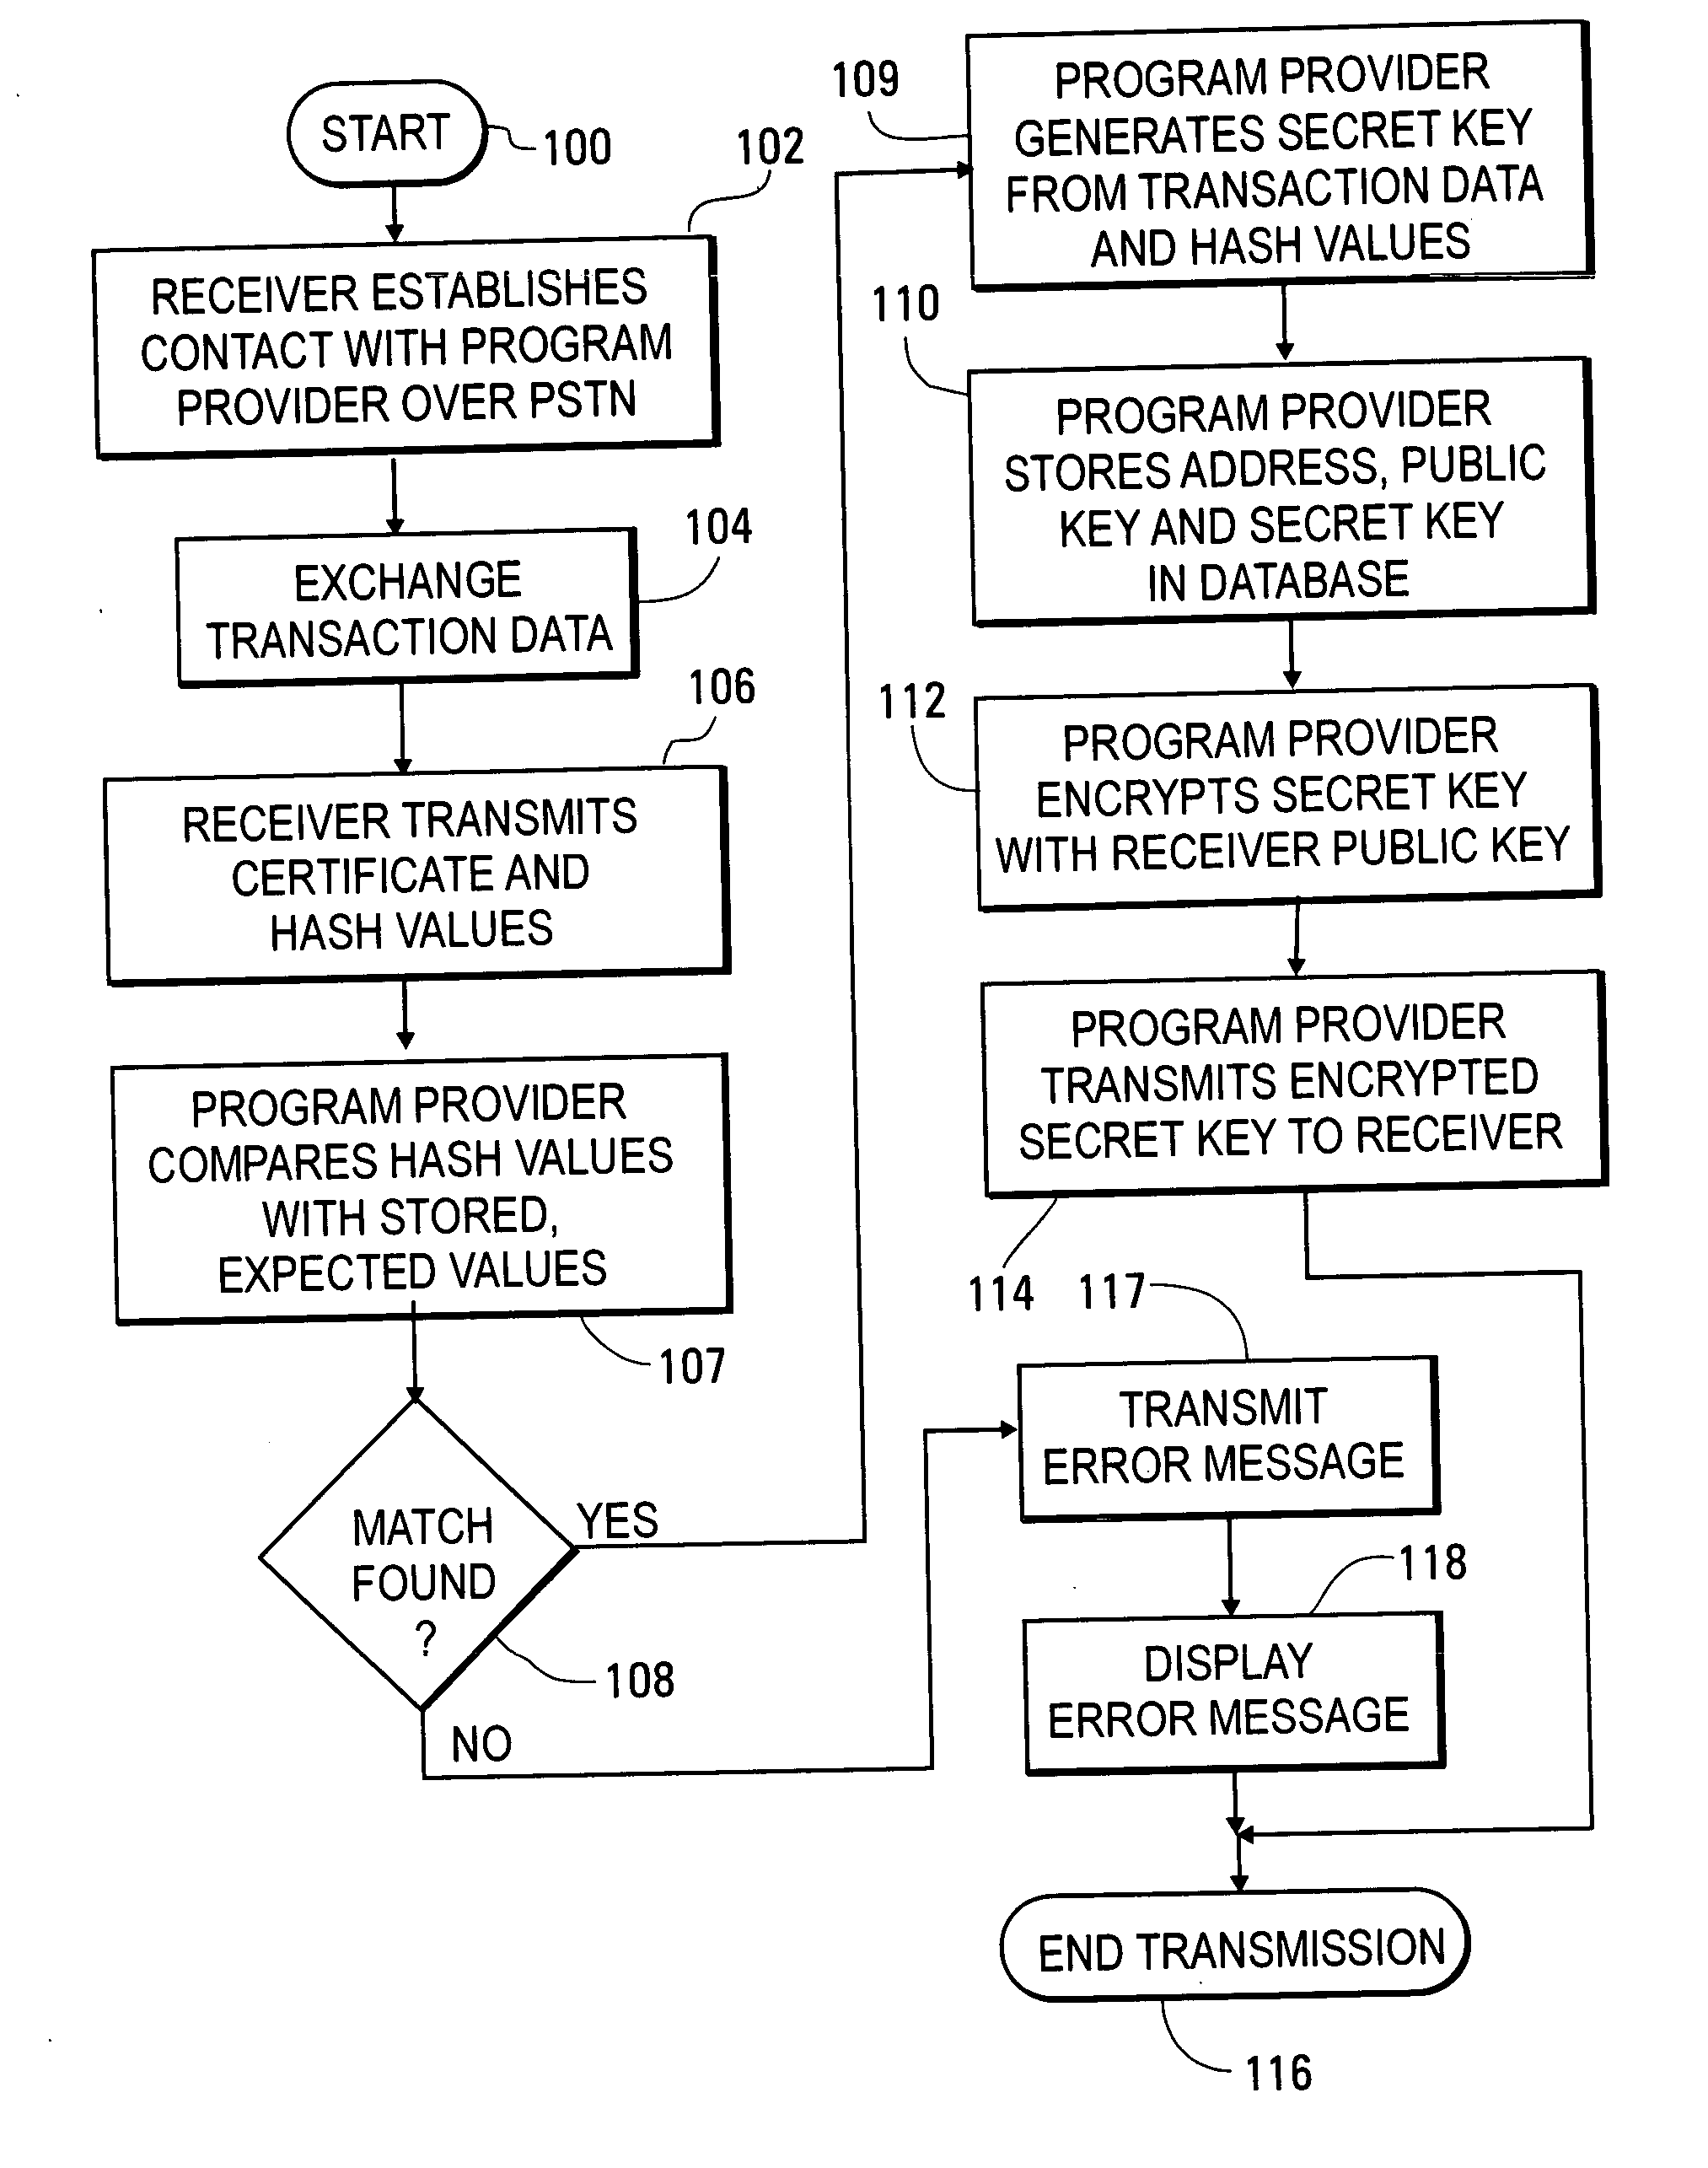 System and method for satellite broadcasting and receiving encrypted television data signals